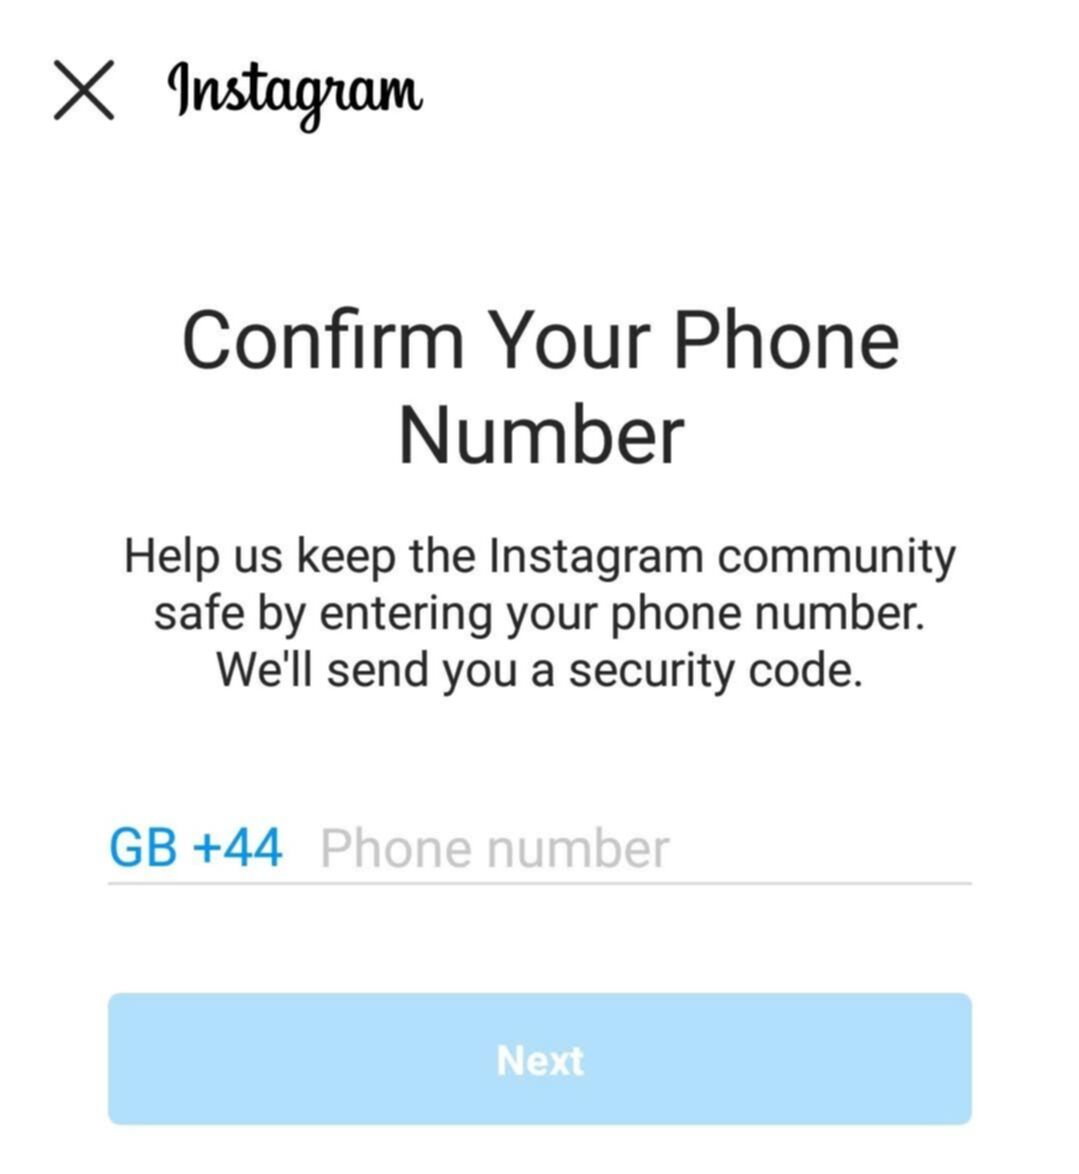 Confirm your phone number. Help us keep the Instagram community safe by entering your phone number. We'll send you a security code.